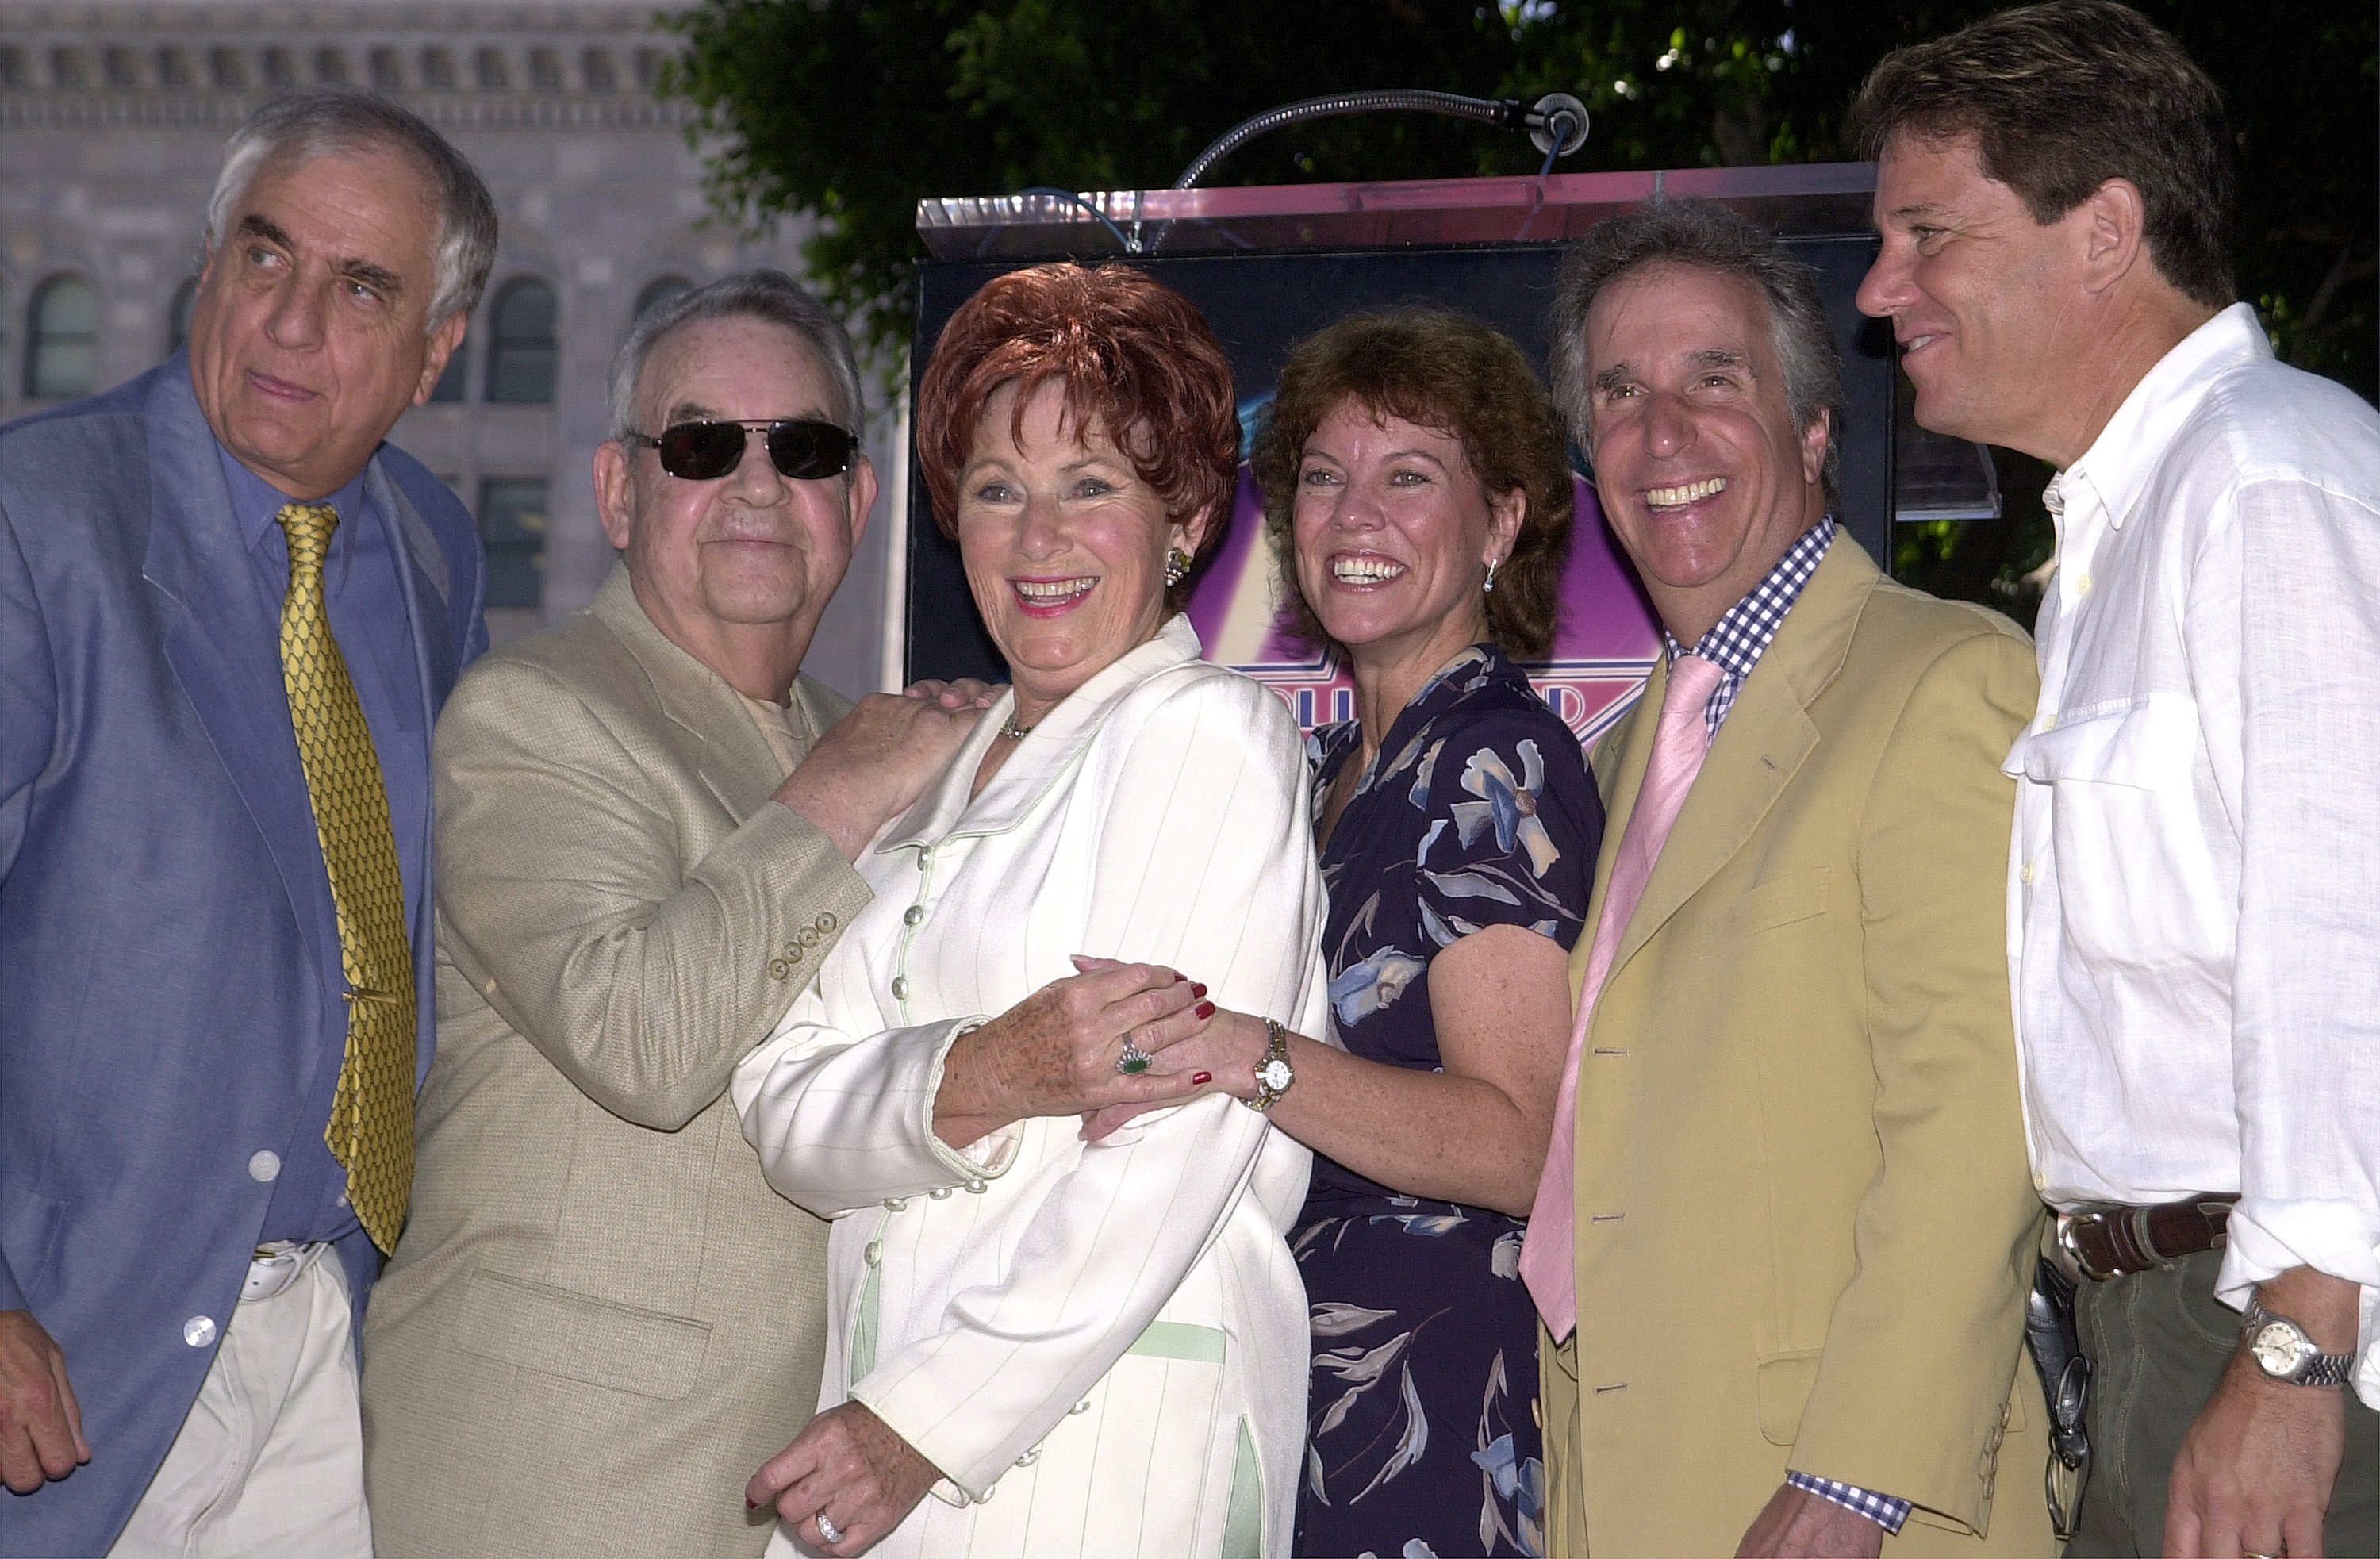 Director Garry Marshall, Tom Bosley, actress Marion Ross, Erin Moran, Henry Winkler and Anson Williams (L-R) on July 12, 2001, in Hollywood, California | Source: Getty Images